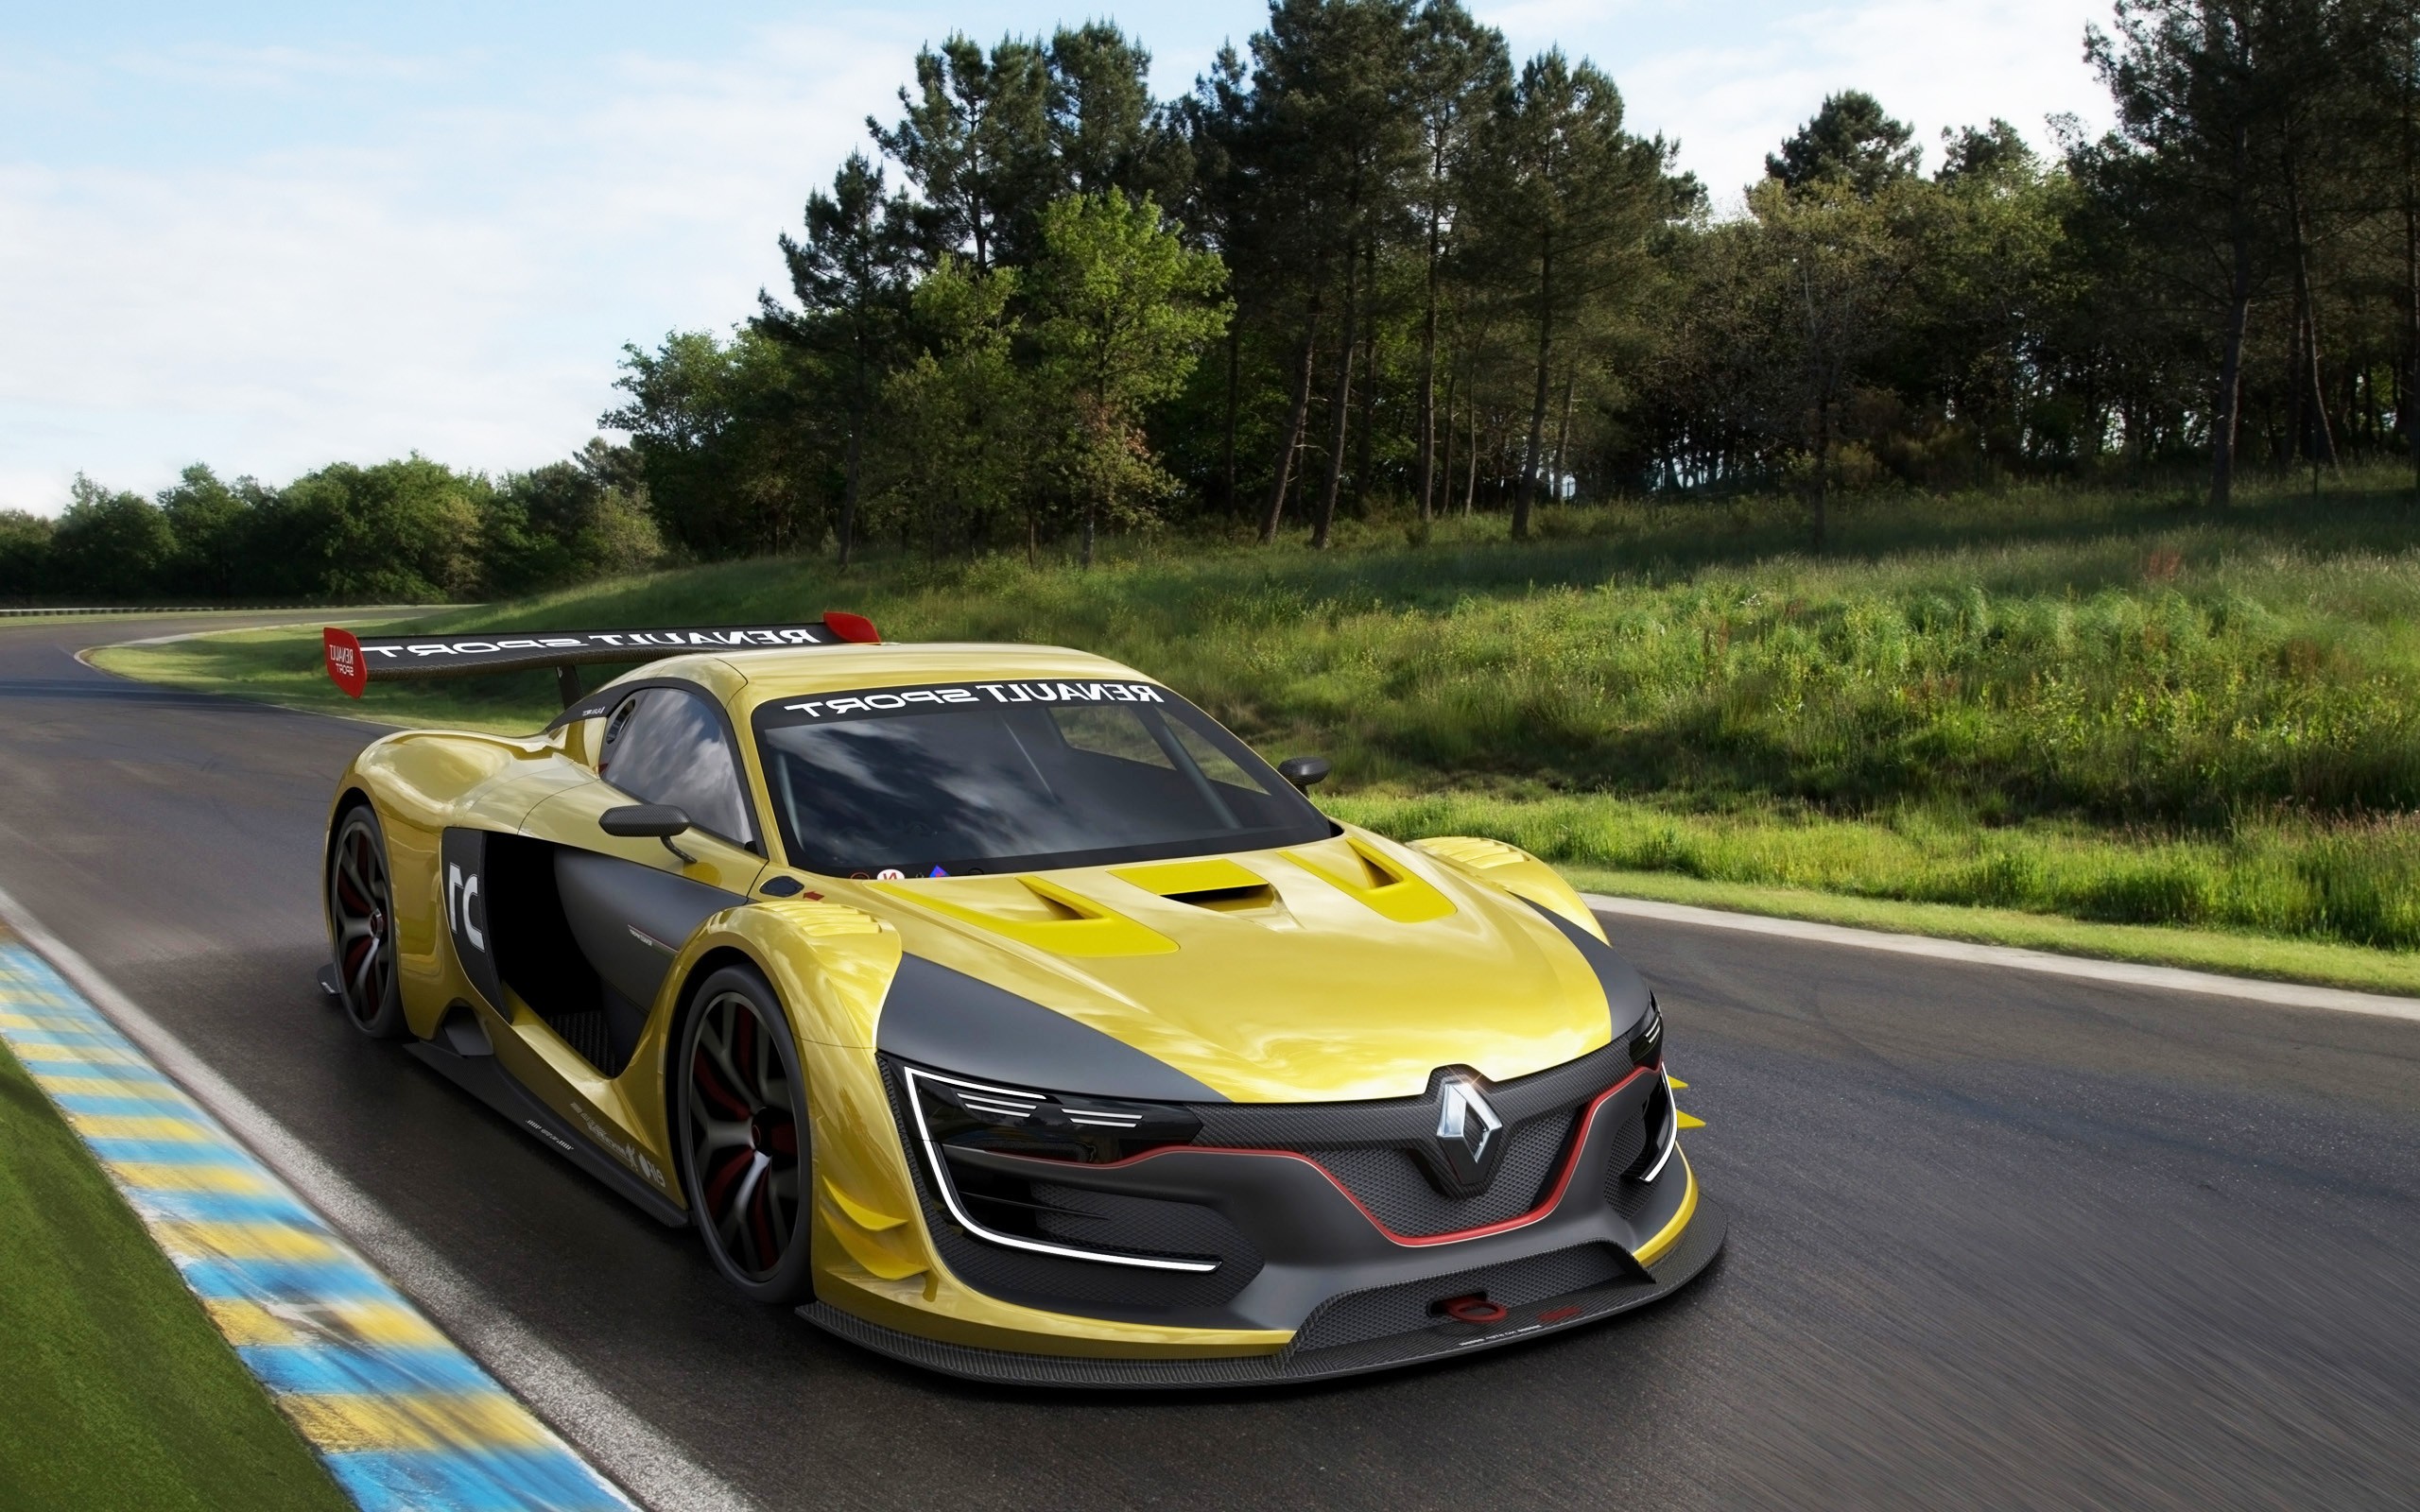 Wallpapers Renault sports car yellow on the desktop